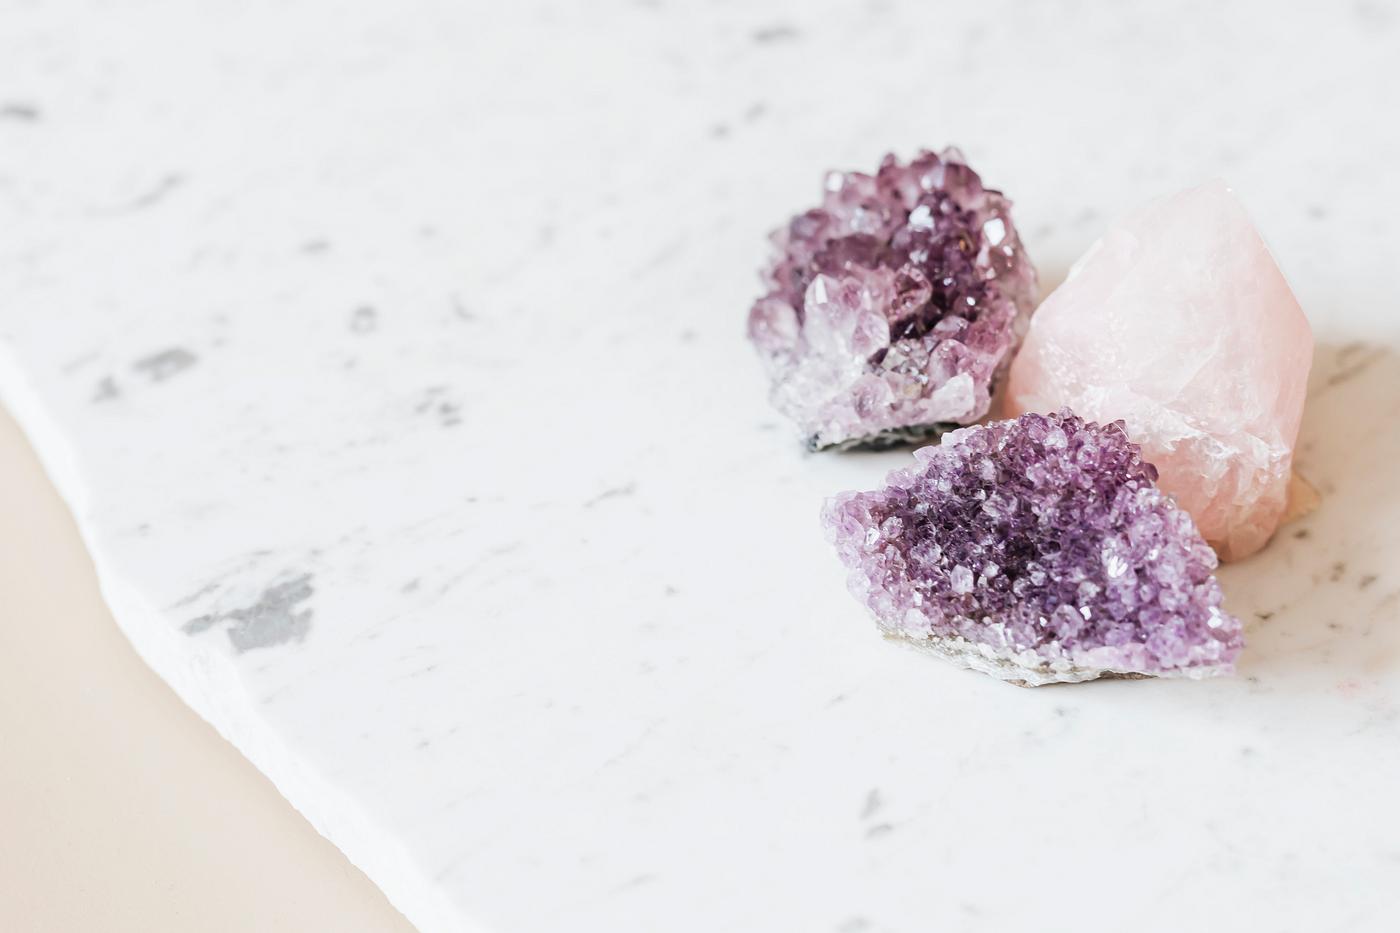 Rose Quartz And Amethyst Healing Crystals On A Marble Countertop